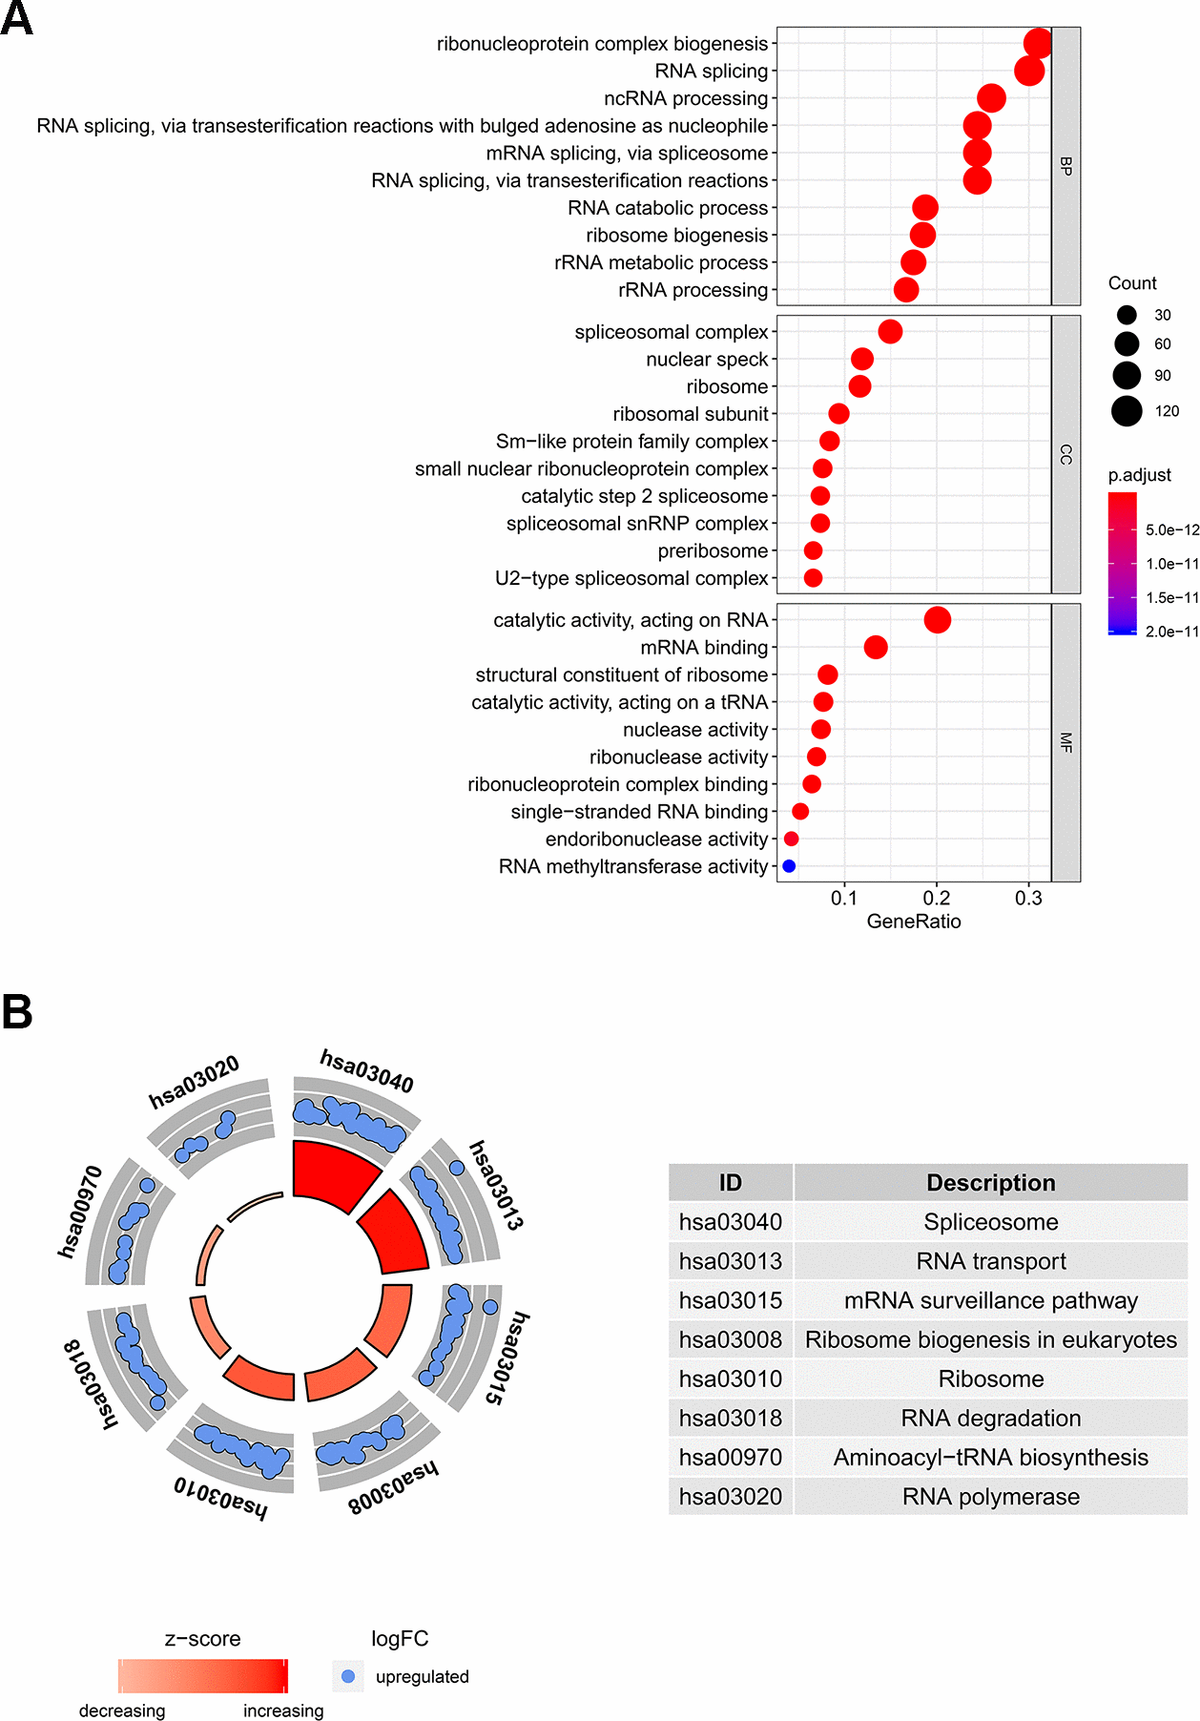 GO and KEGG pathway analysis of differentially expressed RBPs. (A) The top 10 significantly enriched BPs, CCs and MFs in GO analysis. (B) The top 8 significantly enriched pathways in KEGG pathway analysis.